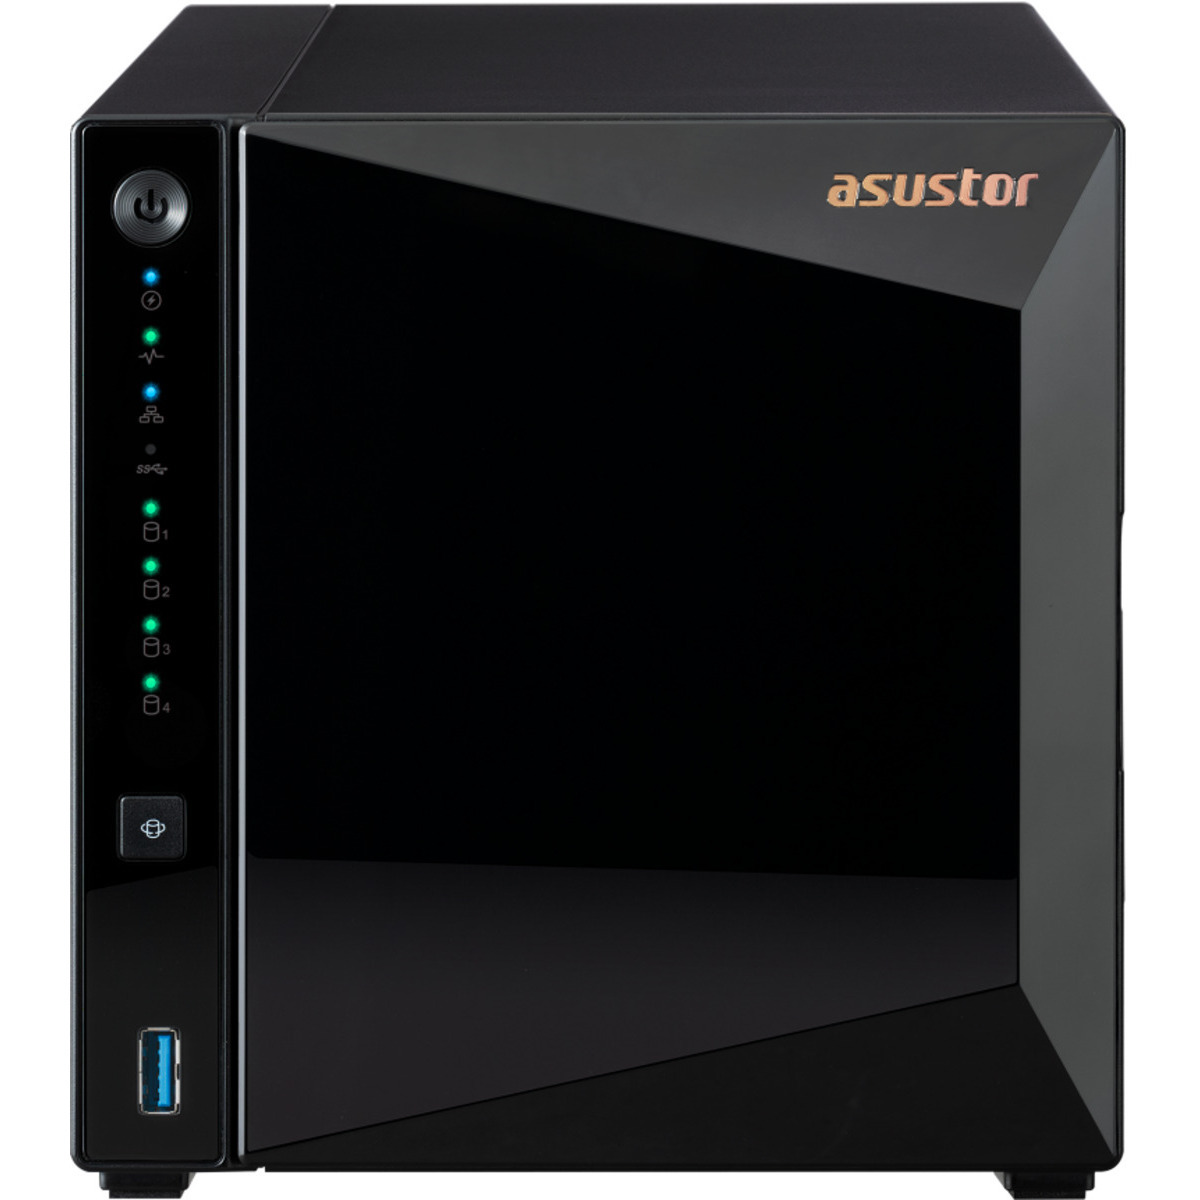 ASUSTOR DRIVESTOR 4 Pro AS3304T 30tb 4-Bay Desktop Personal / Basic Home / Small Office NAS - Network Attached Storage Device 3x10tb Seagate IronWolf Pro ST10000NT001 3.5 7200rpm SATA 6Gb/s HDD NAS Class Drives Installed - Burn-In Tested - ON SALE DRIVESTOR 4 Pro AS3304T